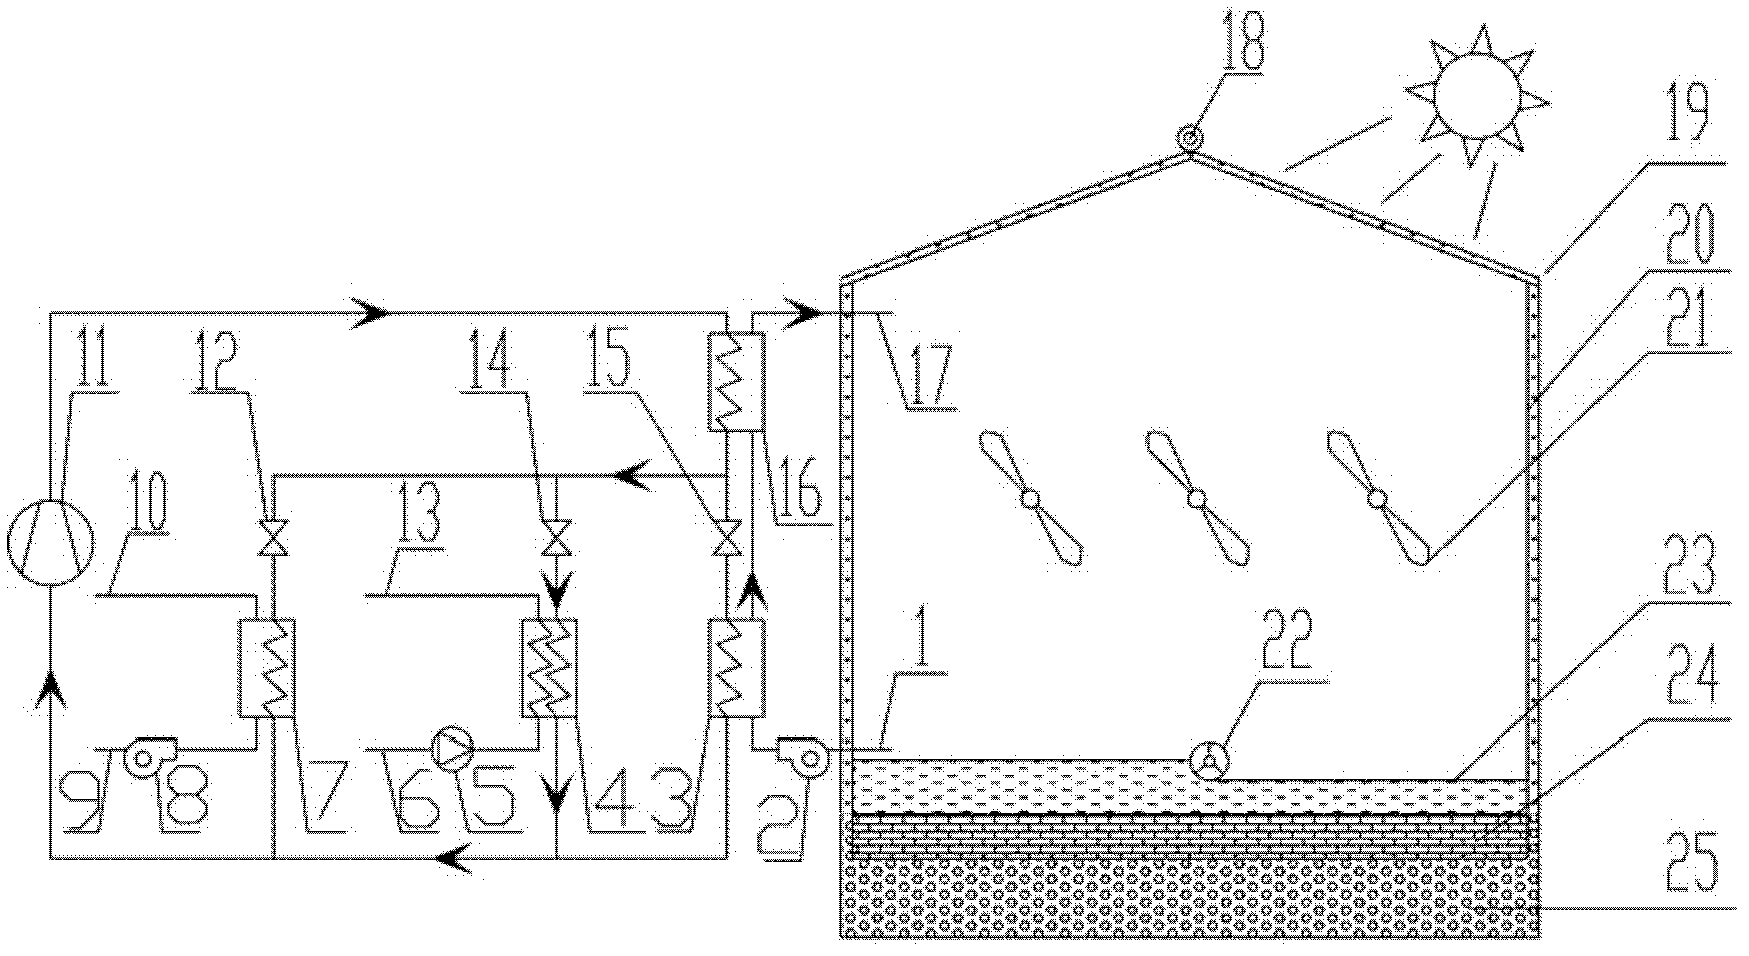 Sludge drying system of combined solar energy and multi-coupled heat pump